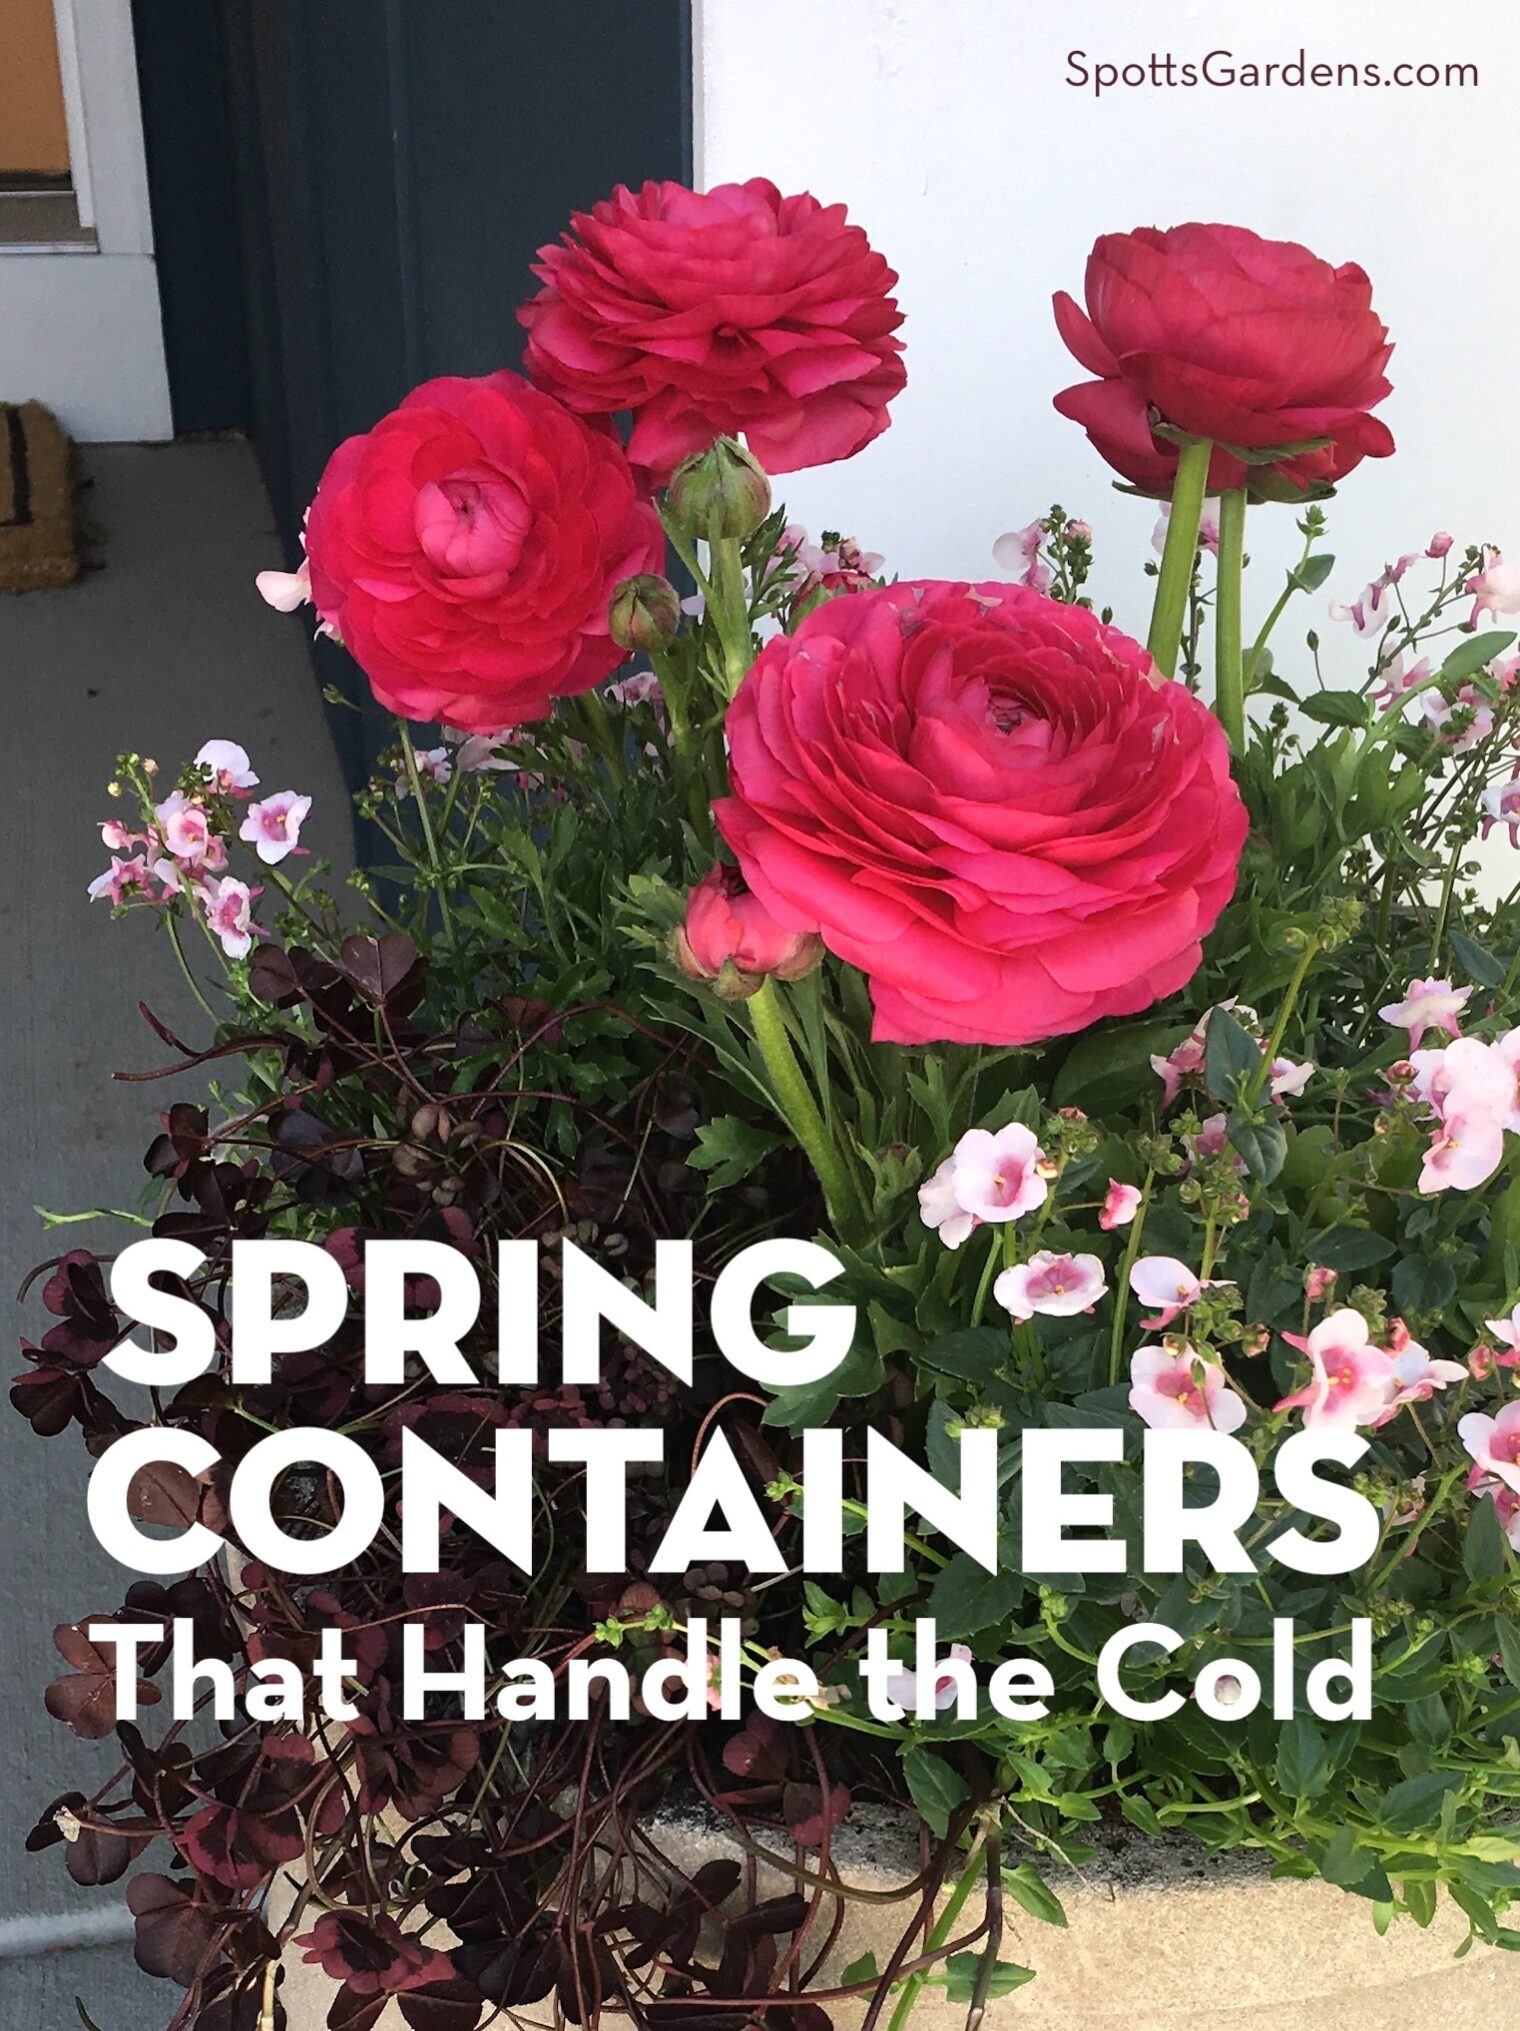 Spring containers that handle the cold